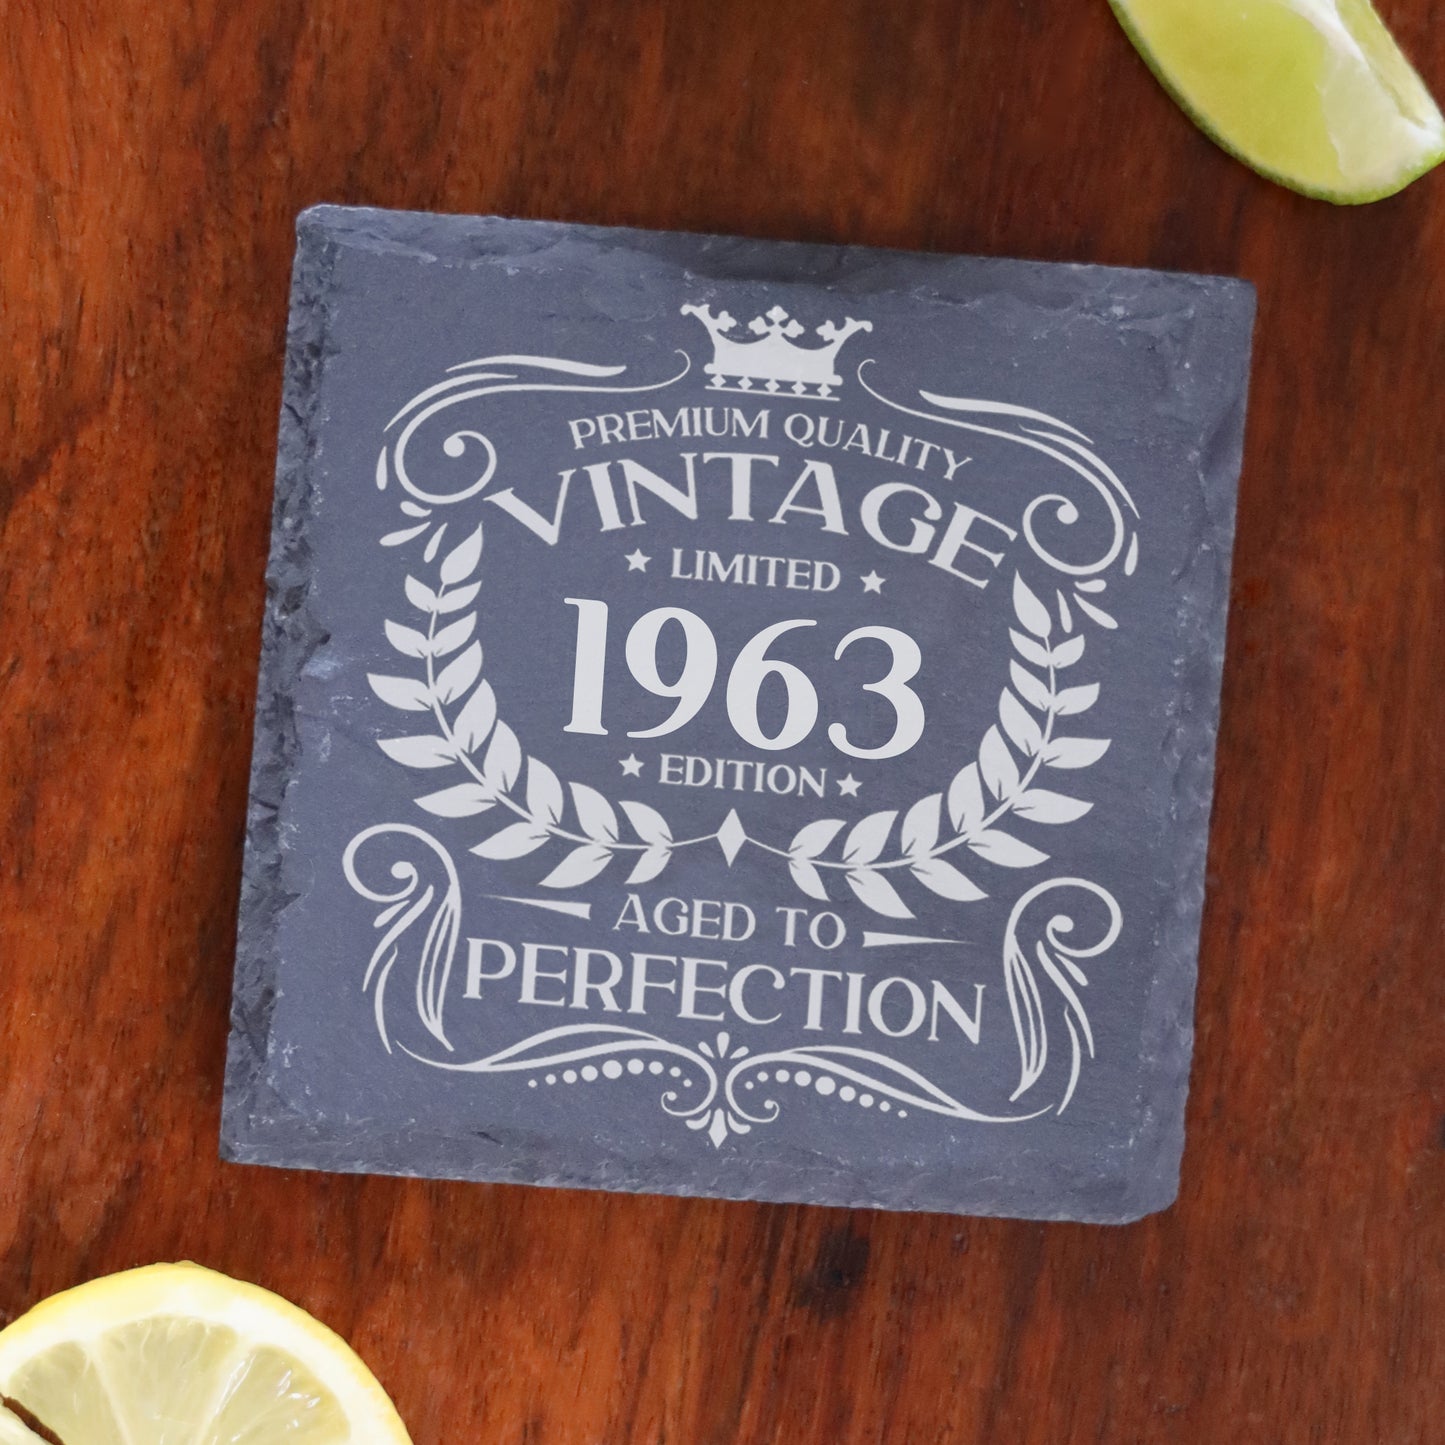 Personalised Vintage 1963 Mug and/or Coaster  - Always Looking Good - Square Coaster On Its Own  